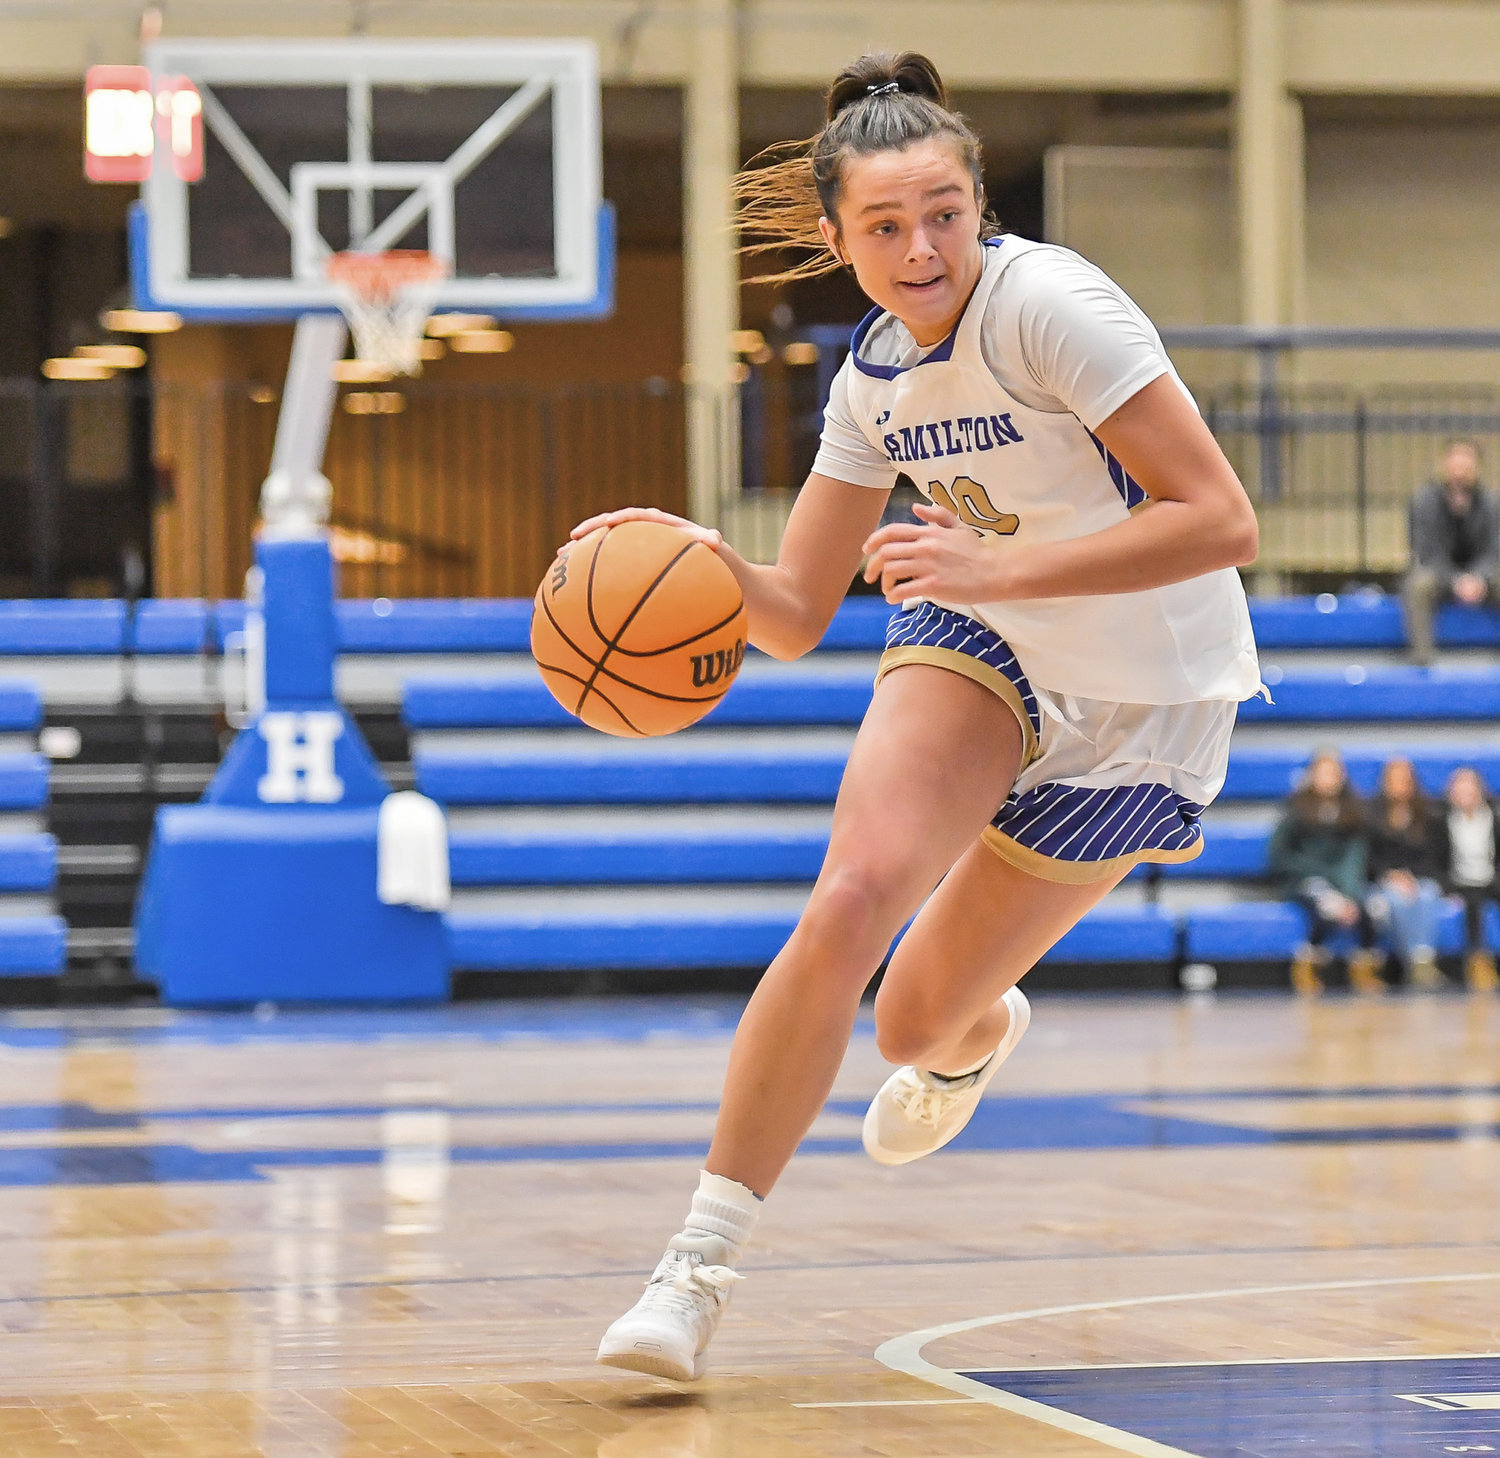 Hamilton College forward Emma Sehring is averaging 12.4 points and a team-high 9.4 rebounds. In her first season as a starter, the 6-foot-1 forward averaged 7.5 points and 6.7 rebounds last year.